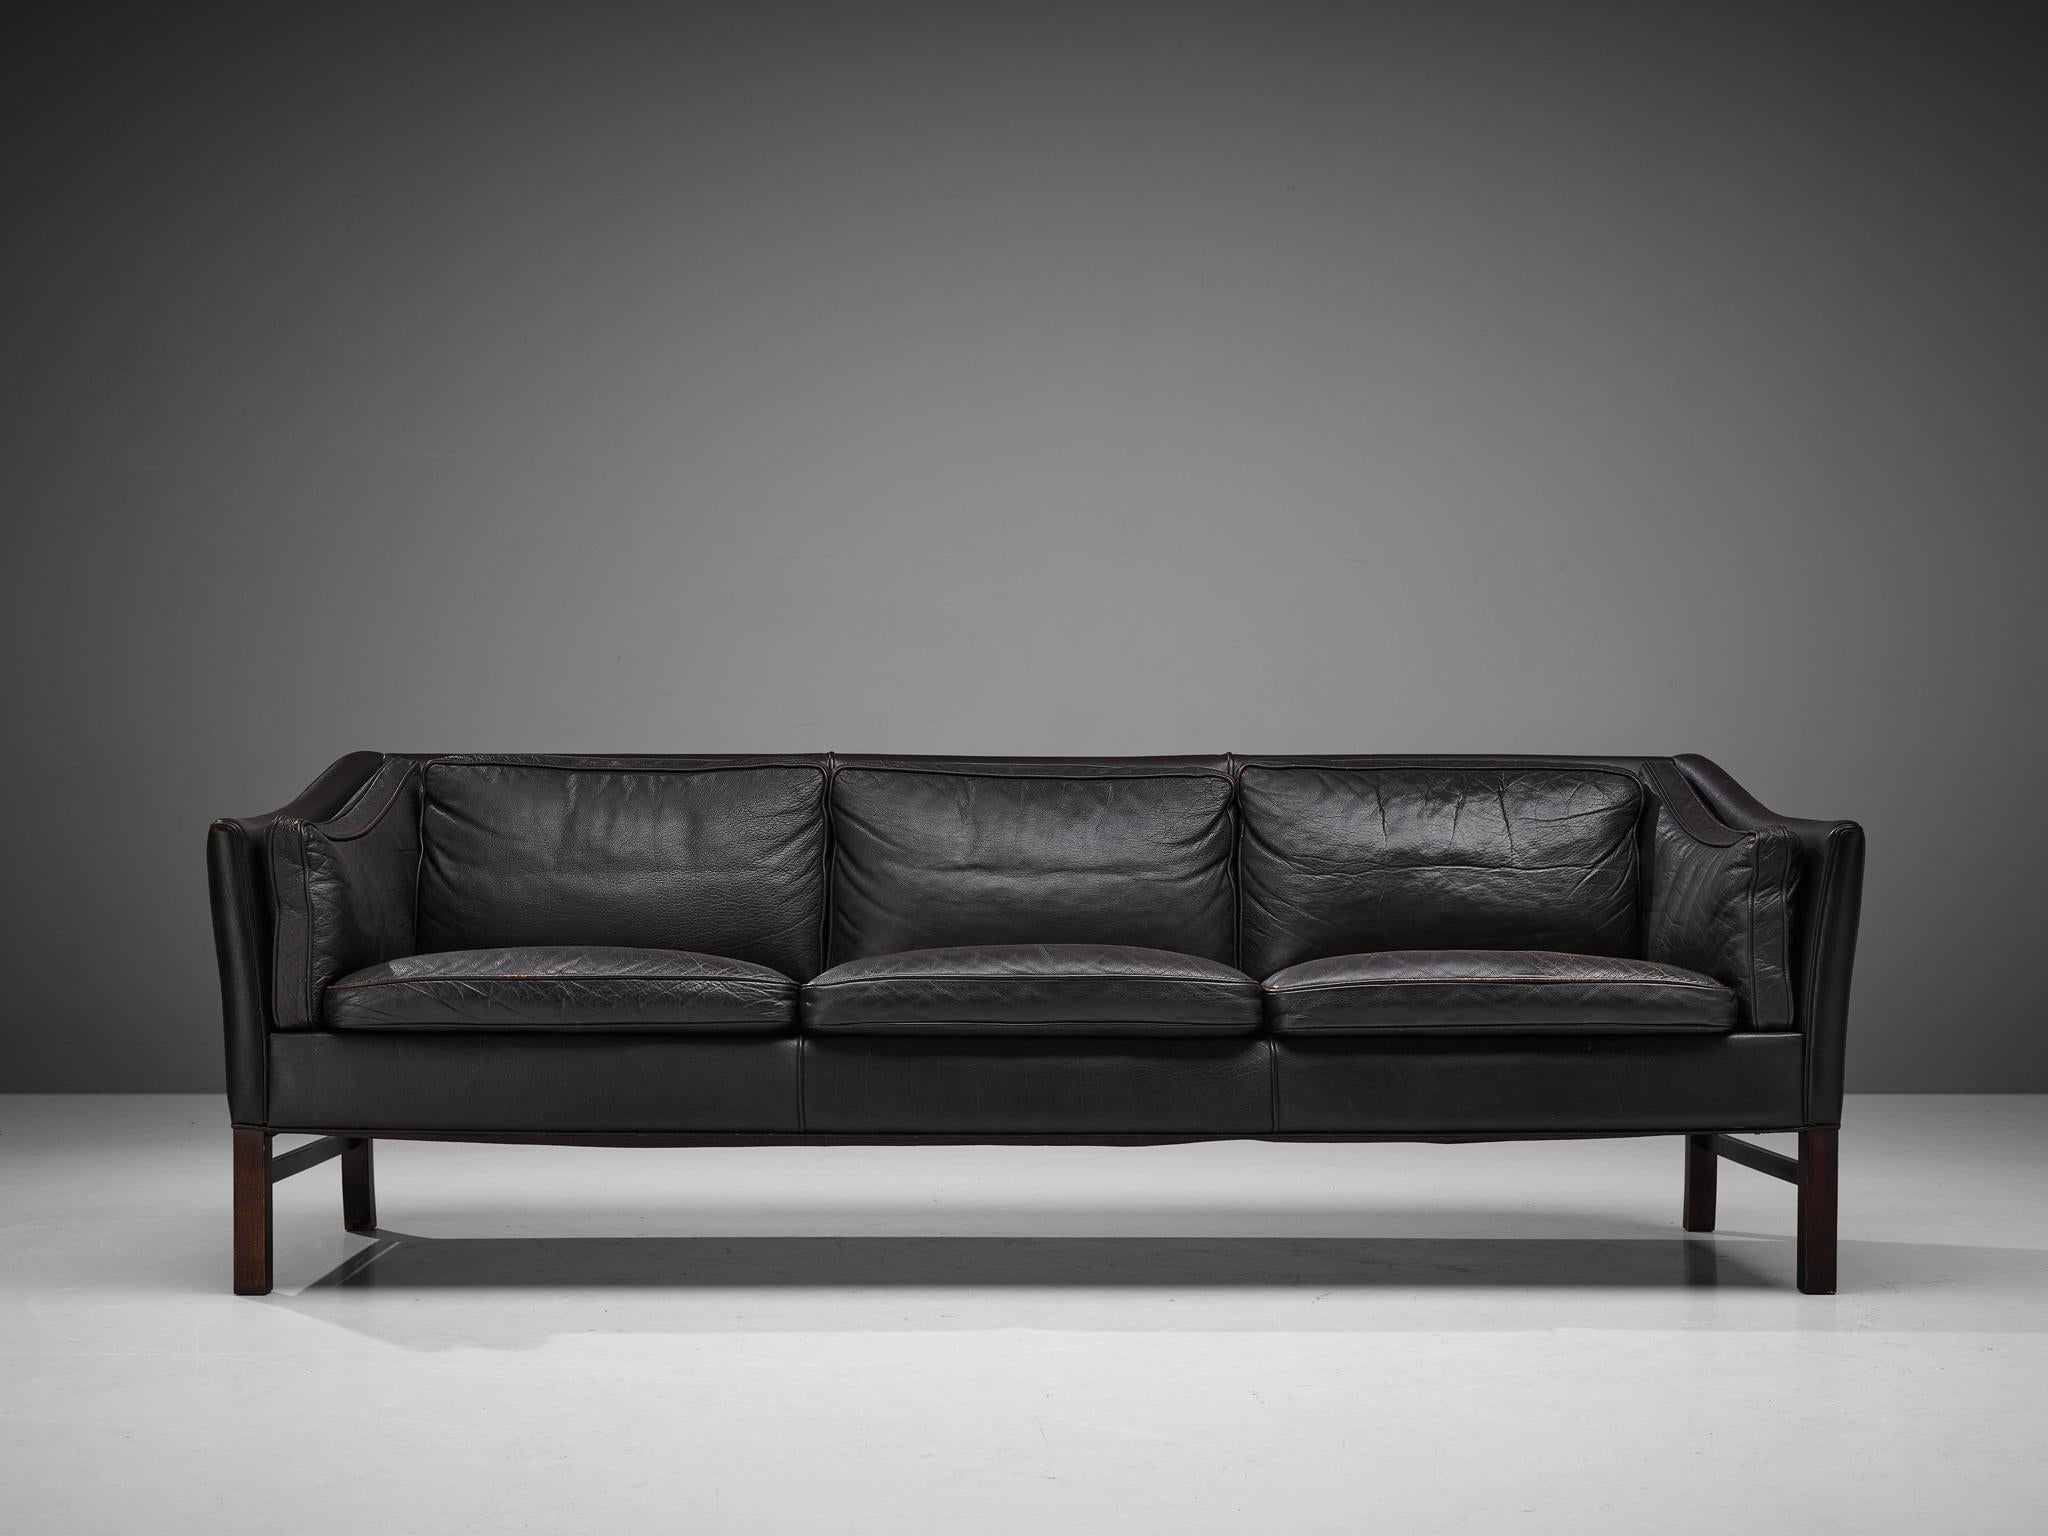 Sofa, leather, stained wood, Denmark, 1960s

This classic sofa of Danish origin features modest and subtle lines and shapes that emphasize the clear construction of the design. The sofa rests on a well-proportioned base that lifts the sofa up